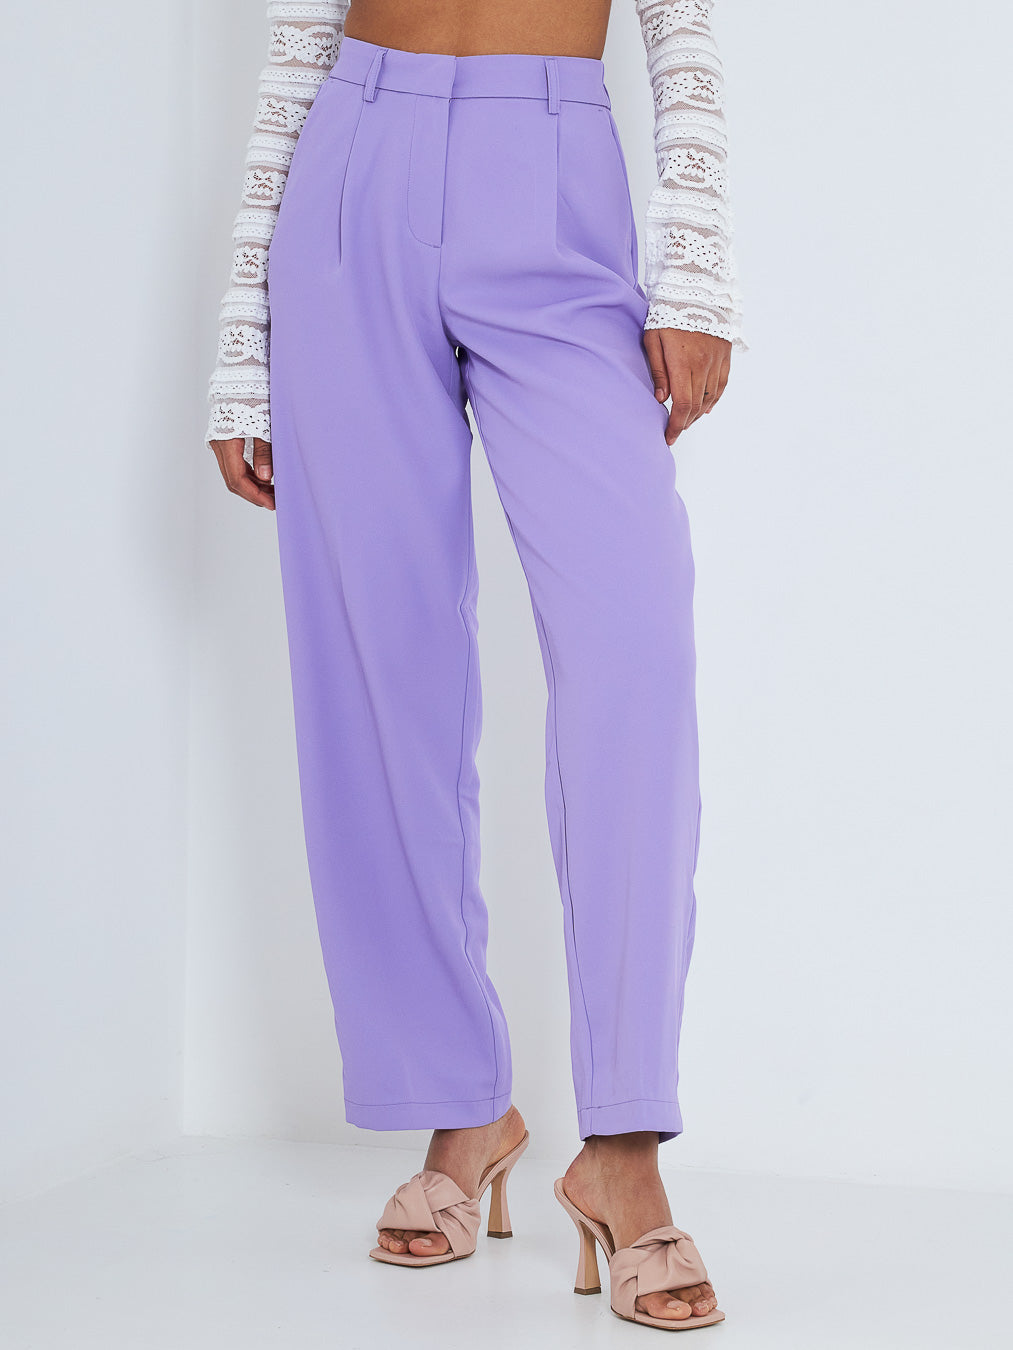 Pieces lilac trousers